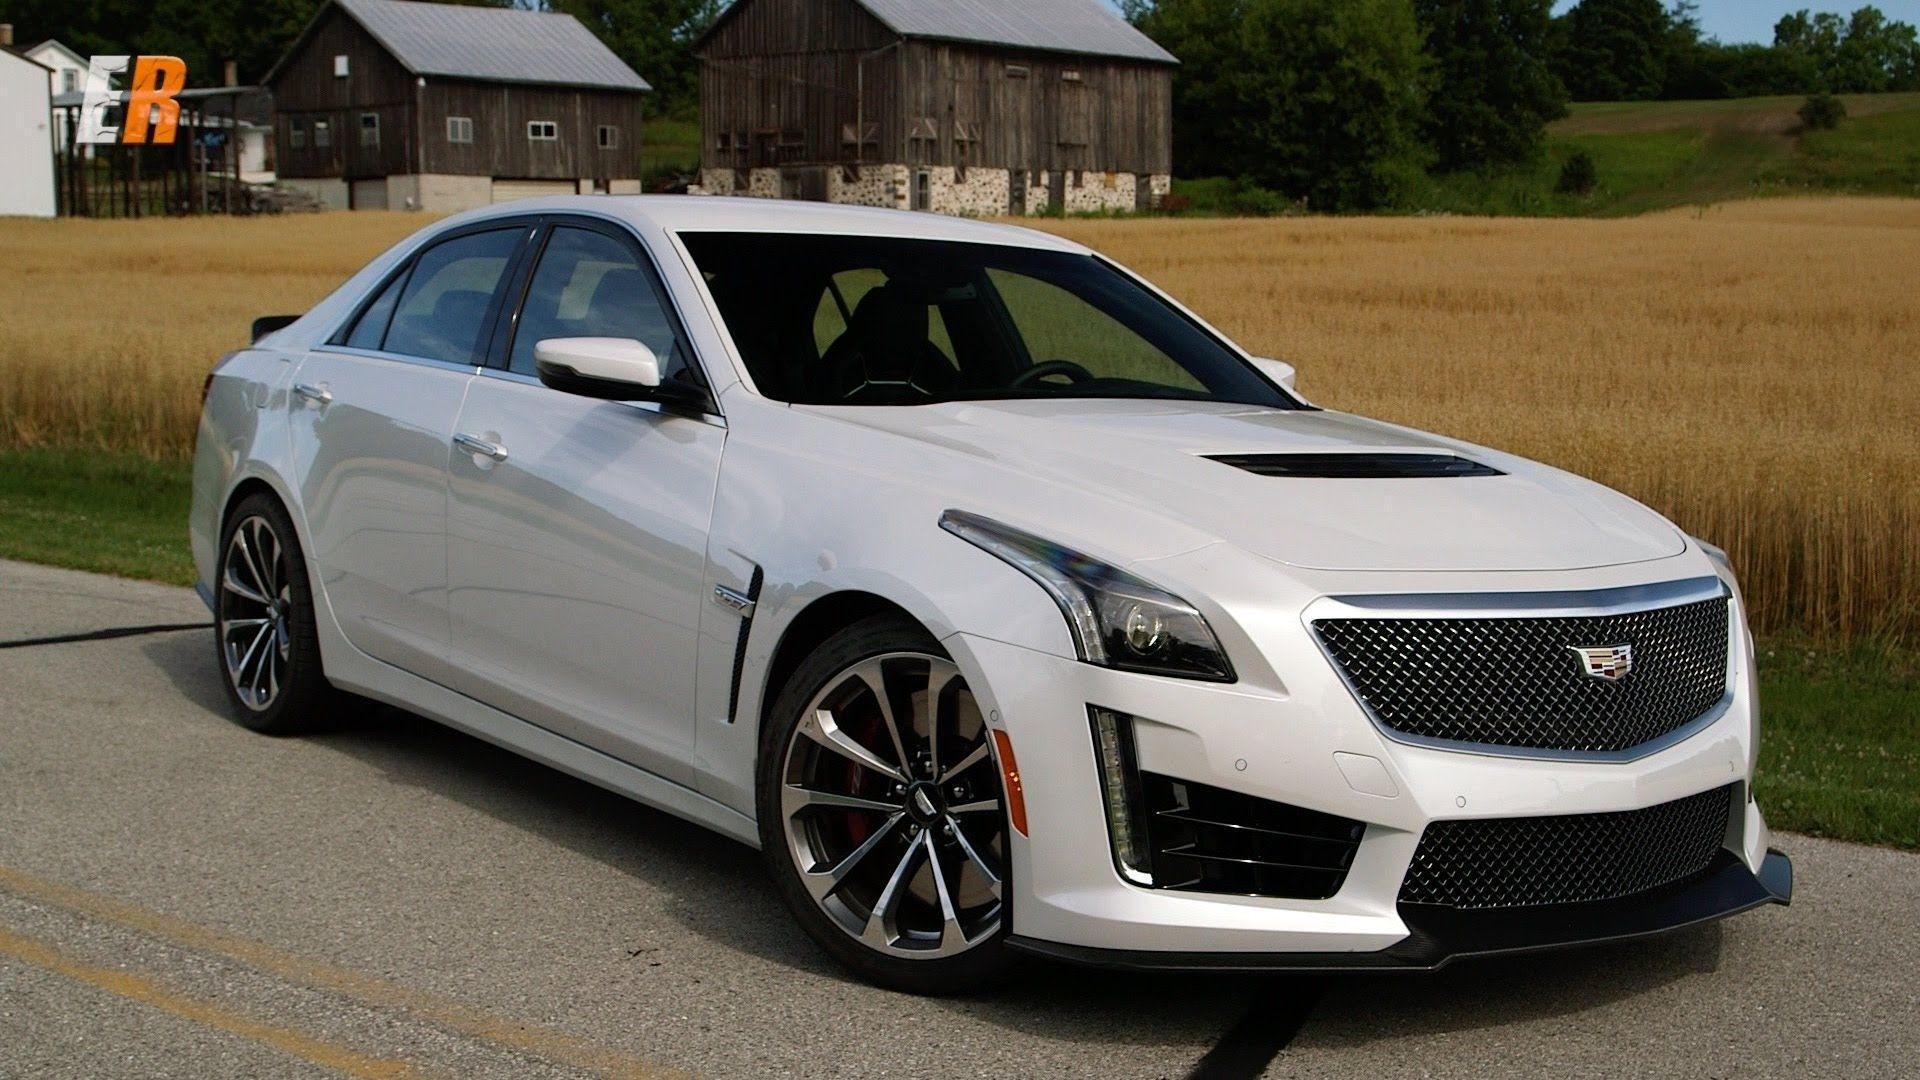 Superb 2016 Cadillac CTS V High Definition Wallpaper Rate